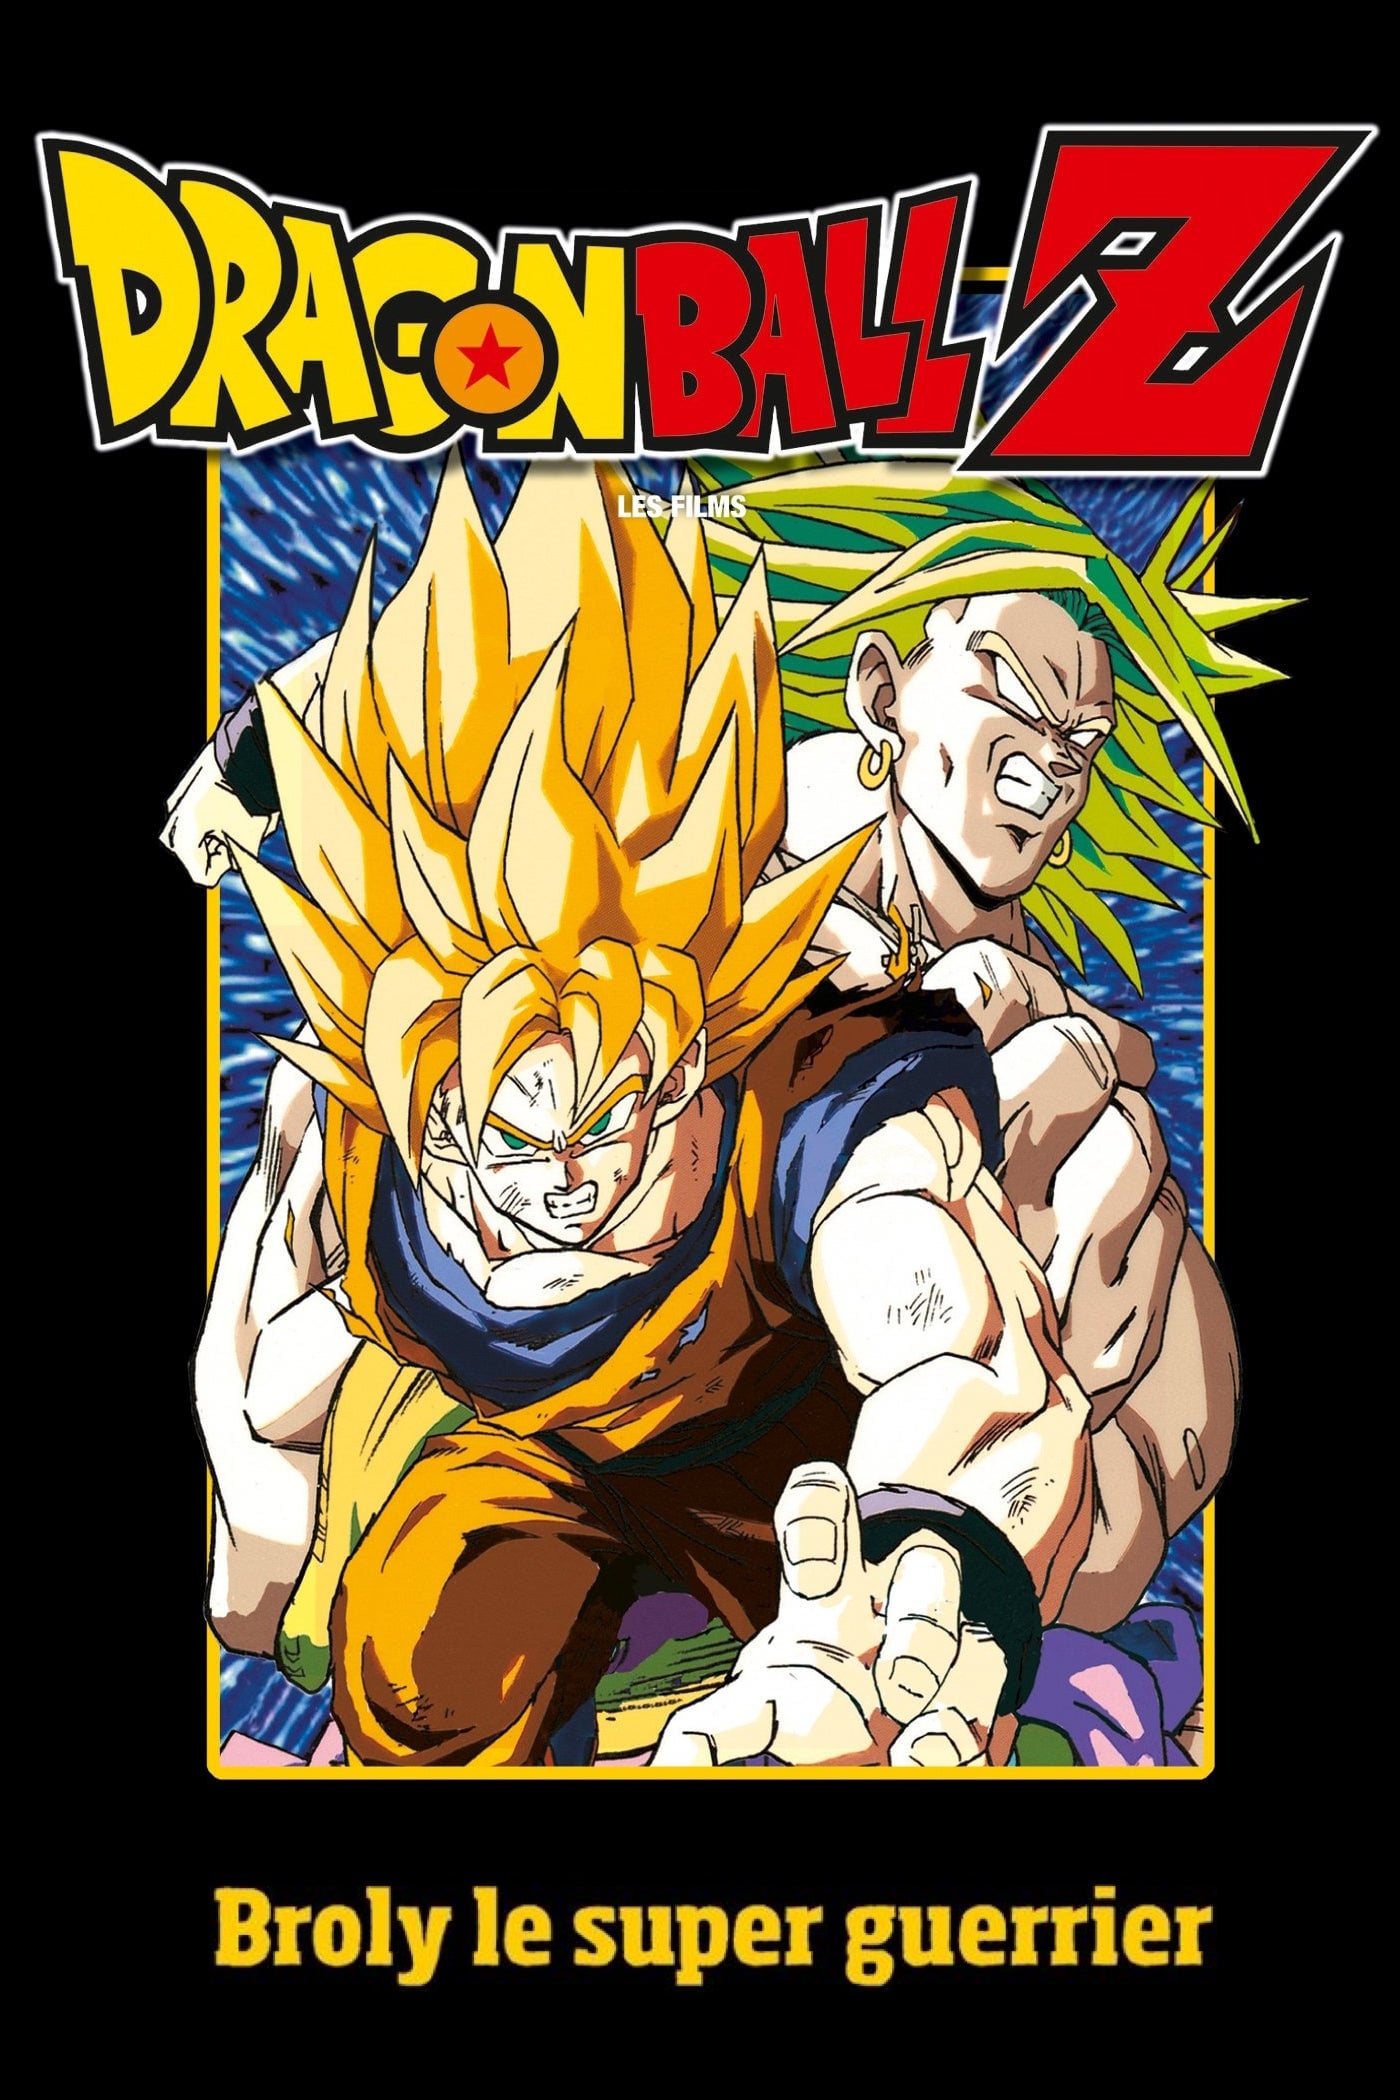 Dragon Ball Z Broly Le Super Guerrier Film 1993 Cineseries